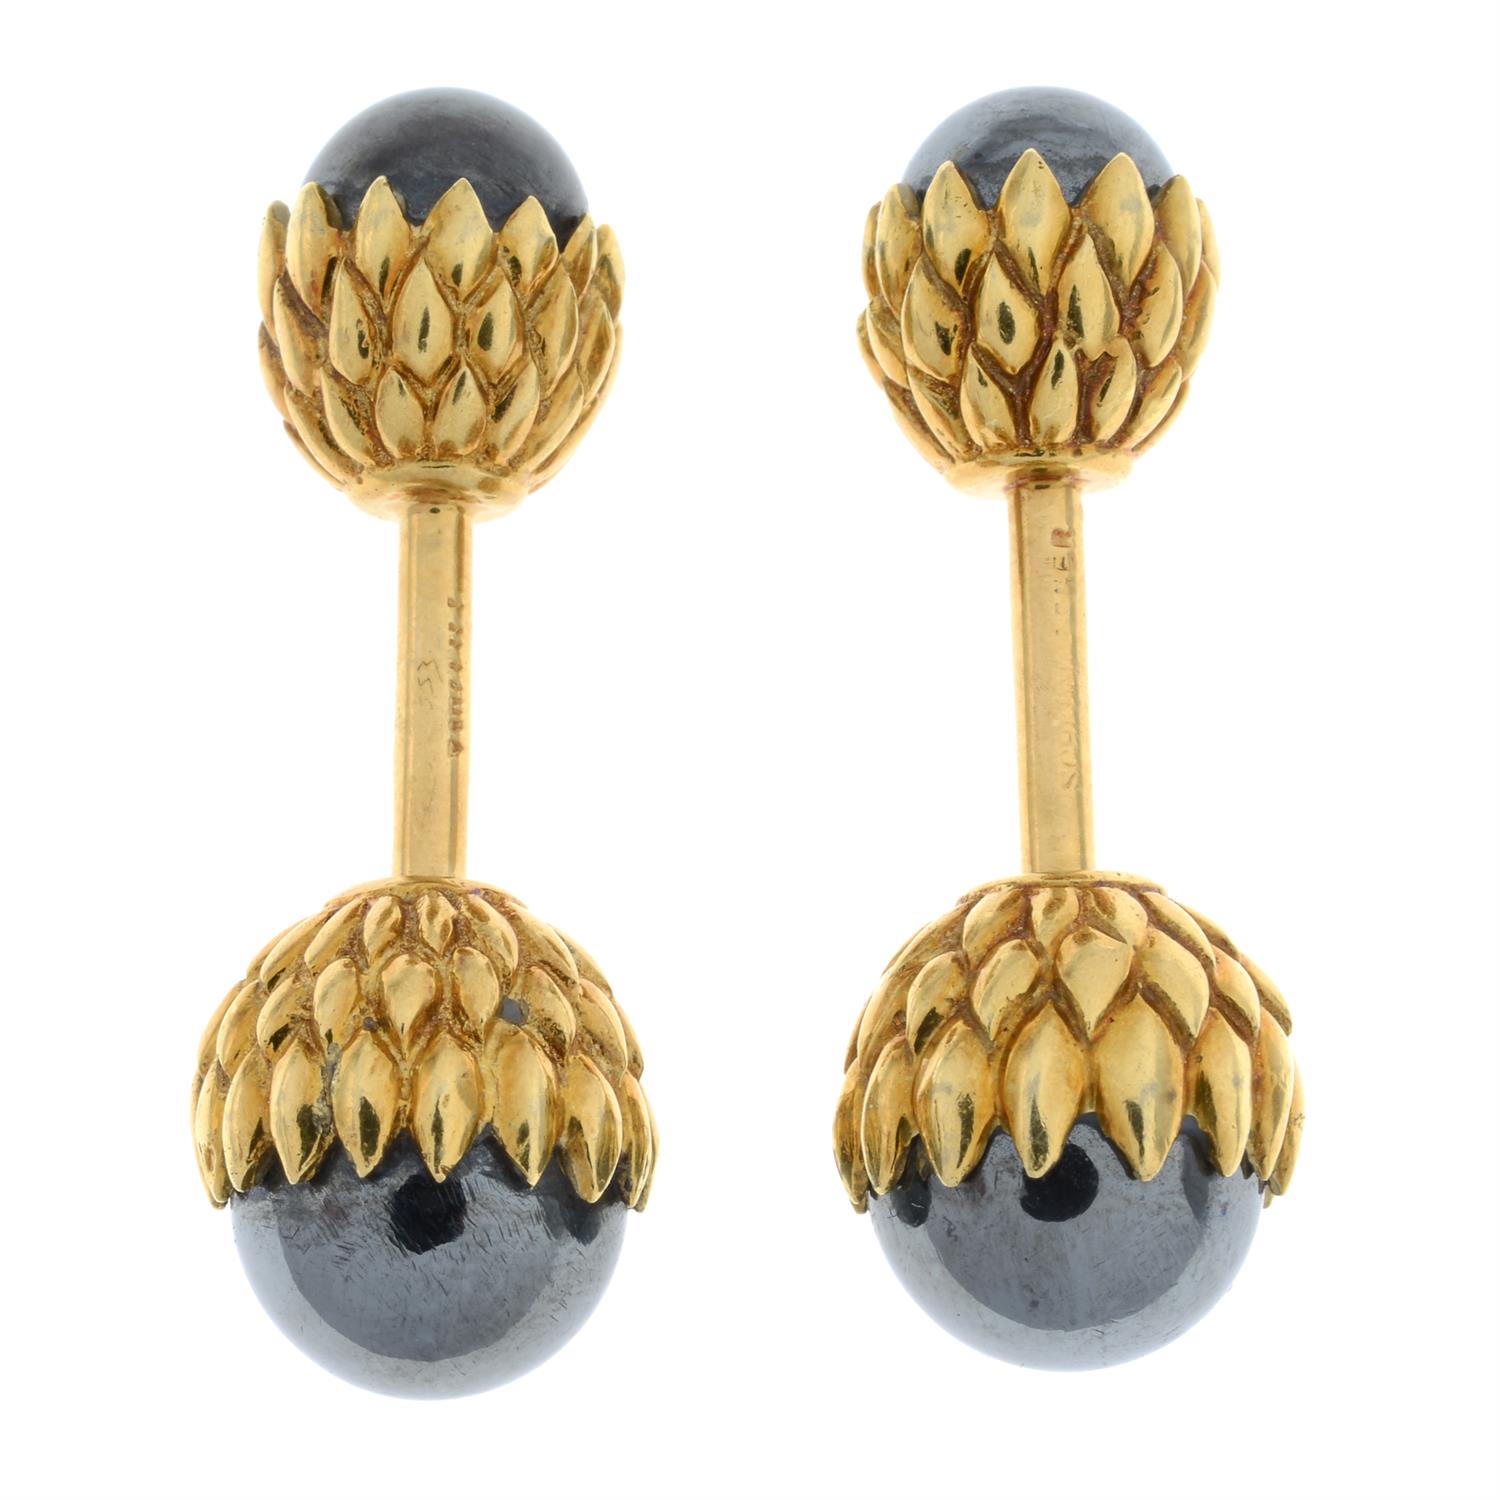 Cufflinks, by Schlumberger, for Tiffany & Co. - Image 3 of 4